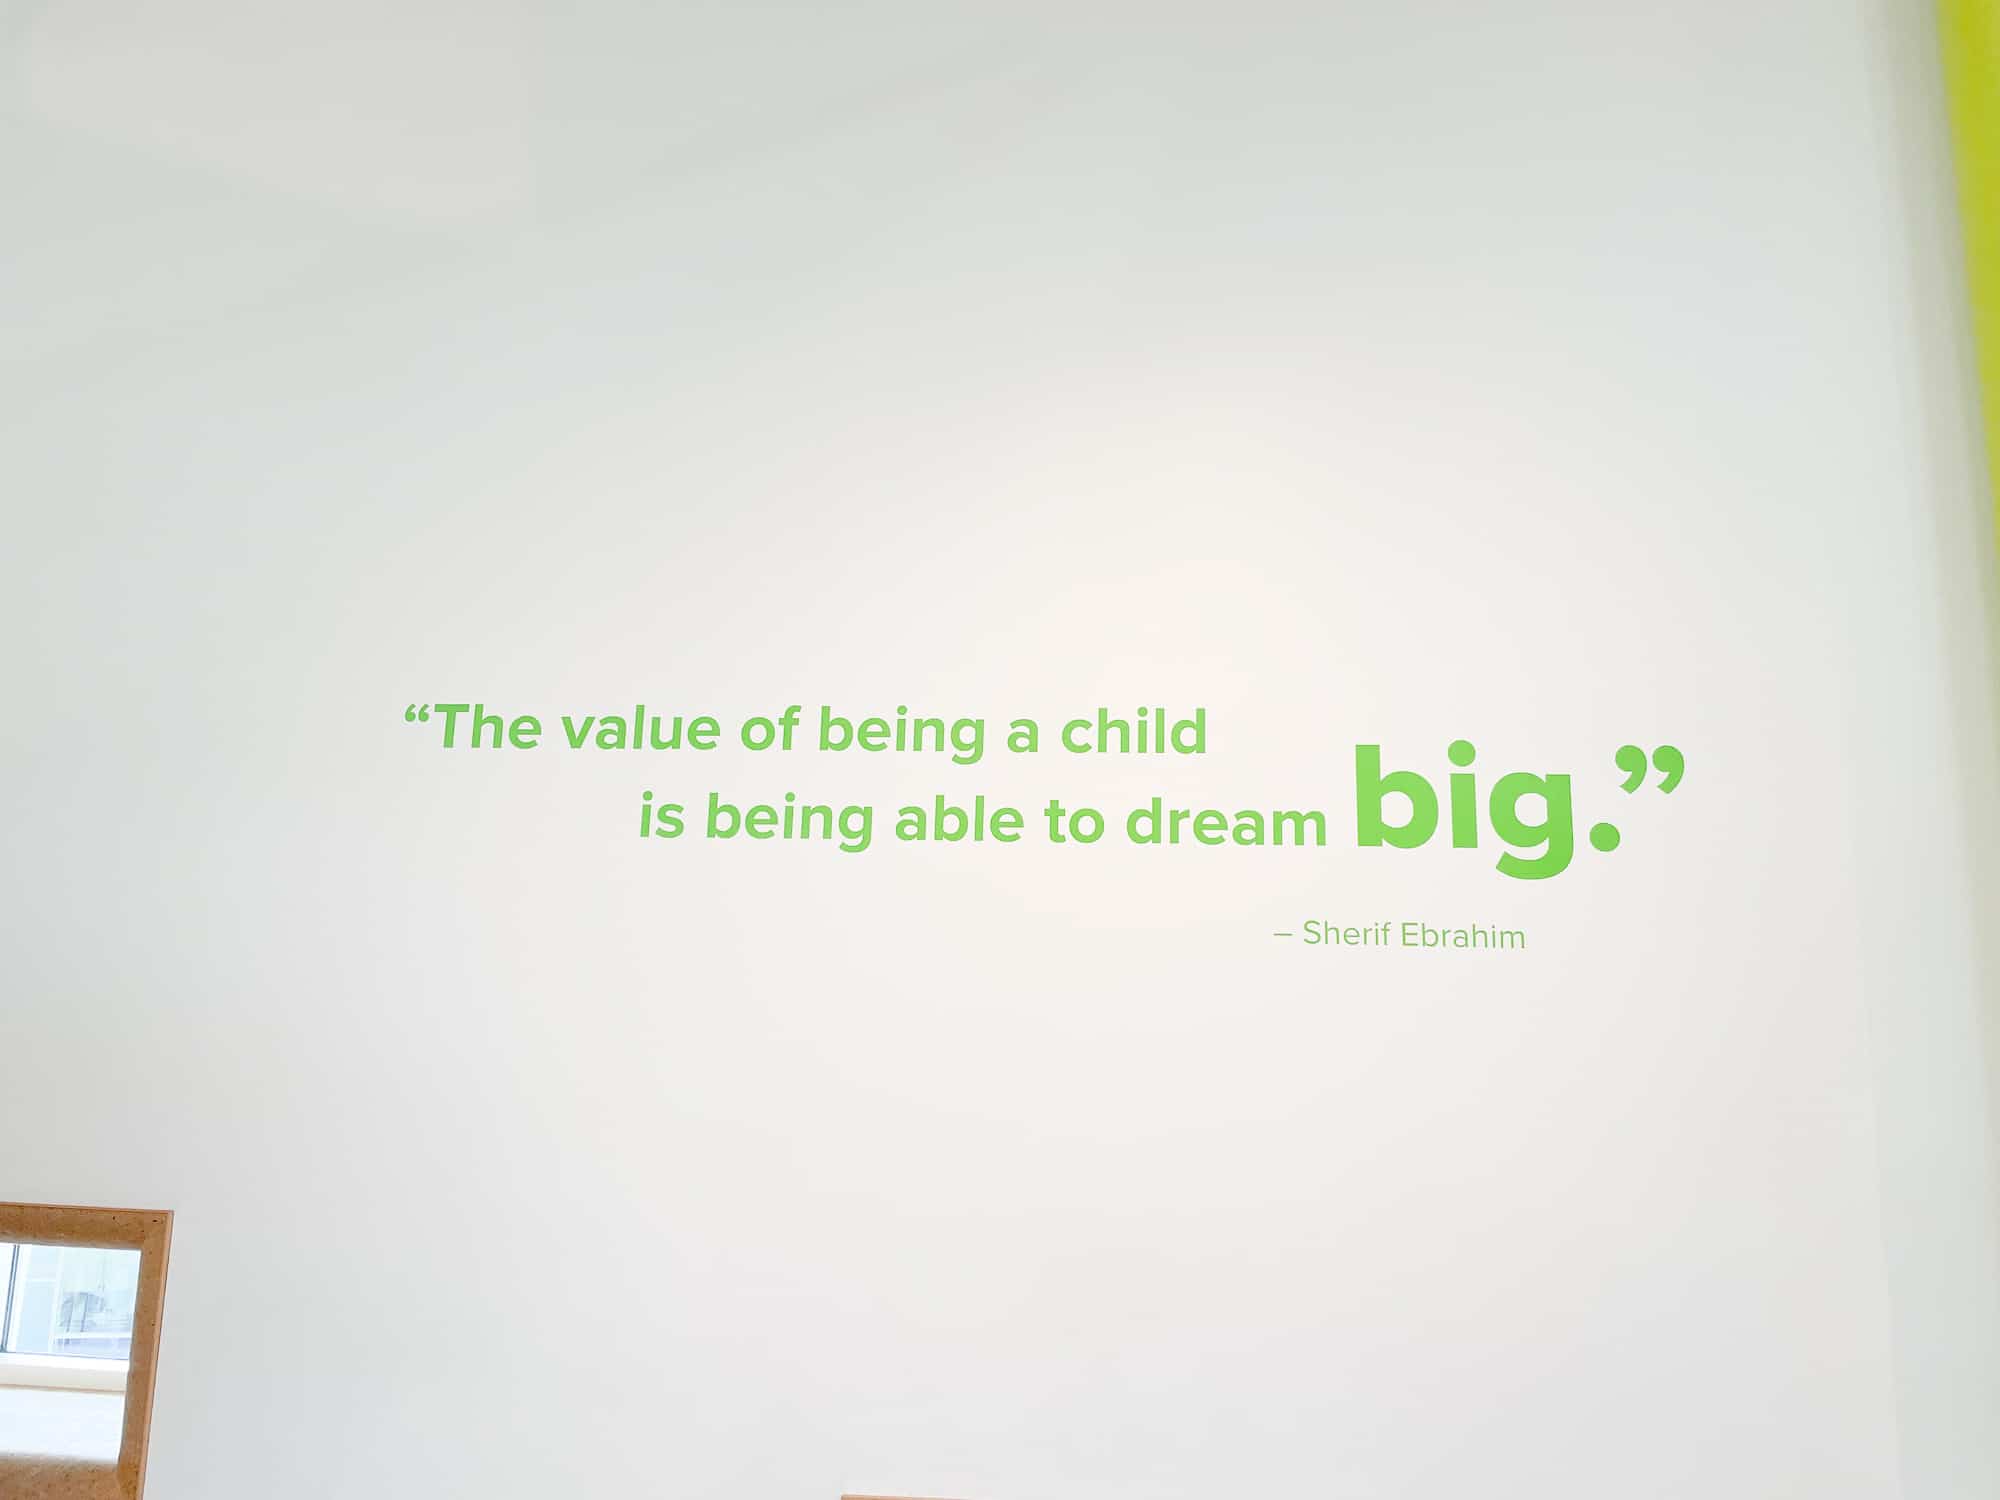 USA - New Orleans - Louisiana Children Museum - the value of being a child is being able to dream big